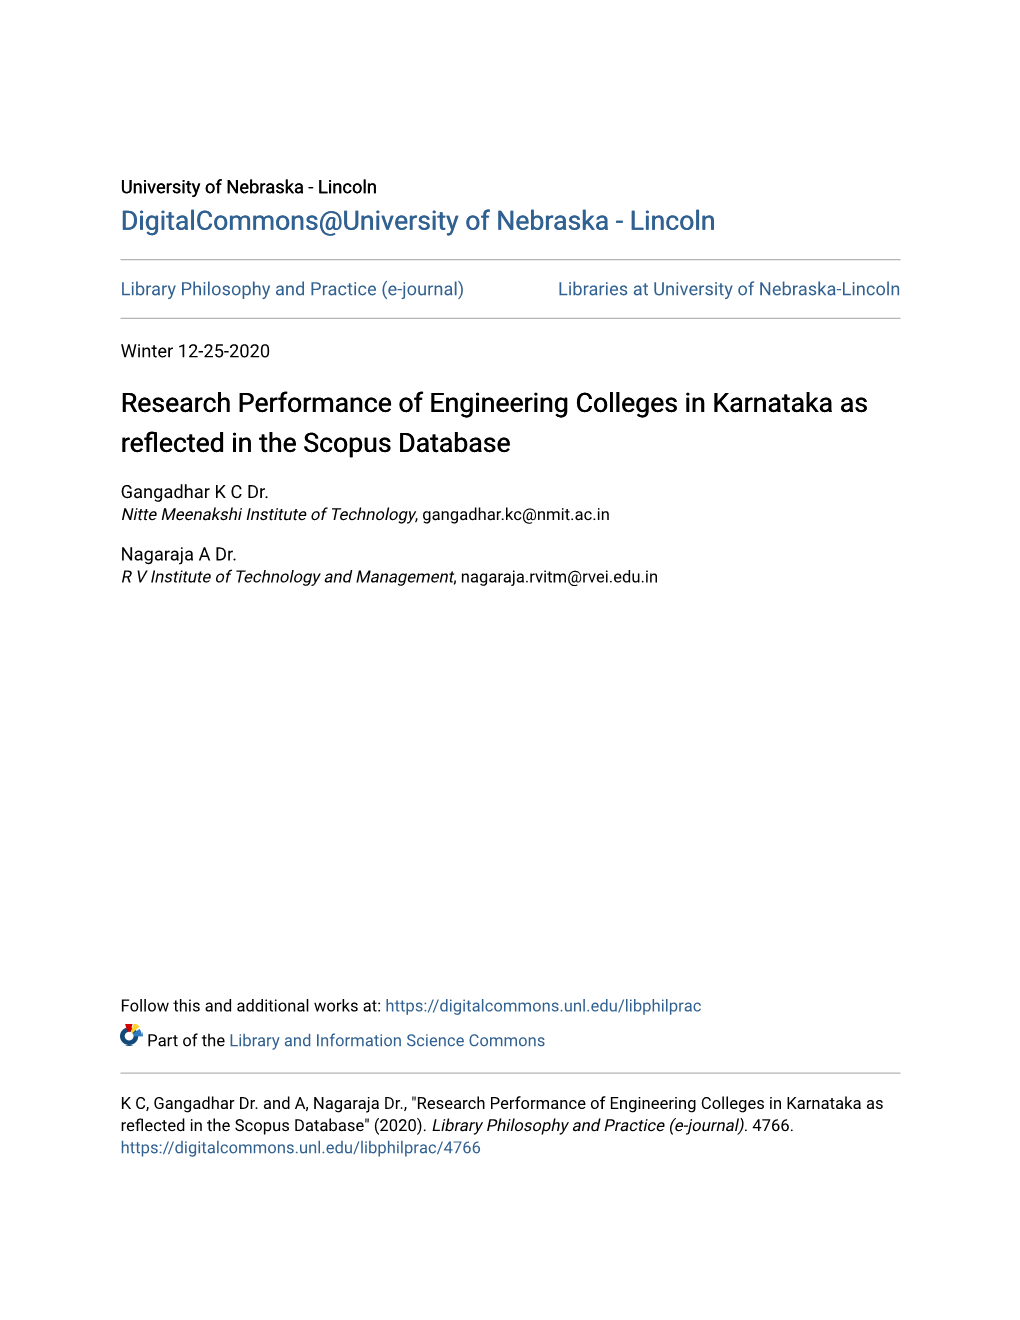 Research Performance of Engineering Colleges in Karnataka As Reflected in the Scopus Database